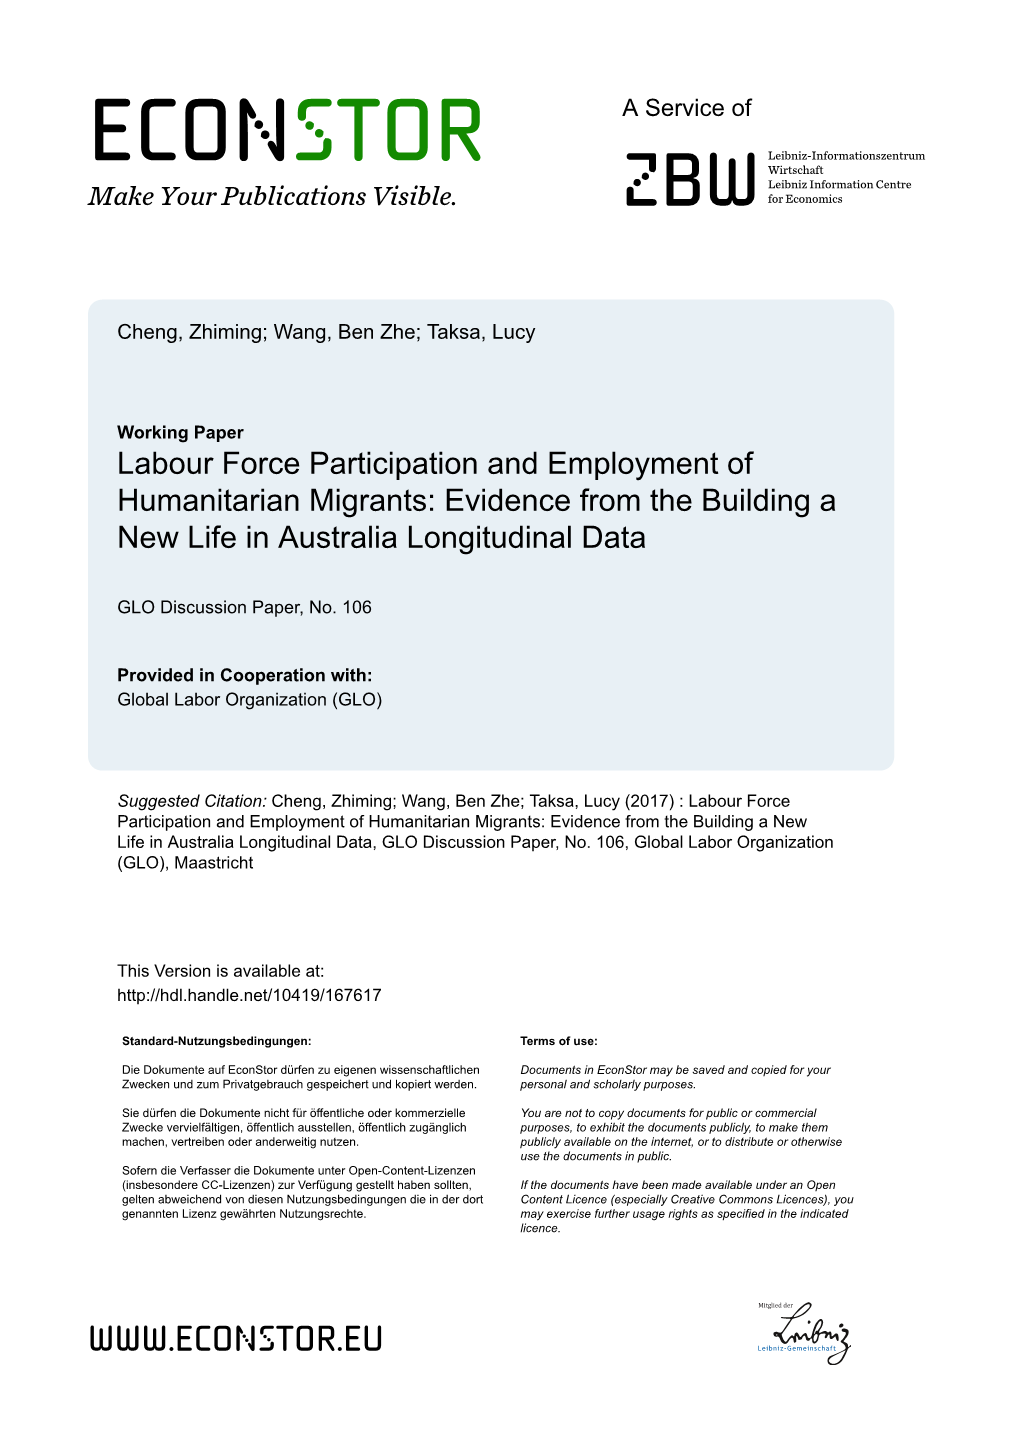 Labour Force Participation and Employment of Humanitarian Migrants: Evidence from the Building a New Life in Australia Longitudinal Data